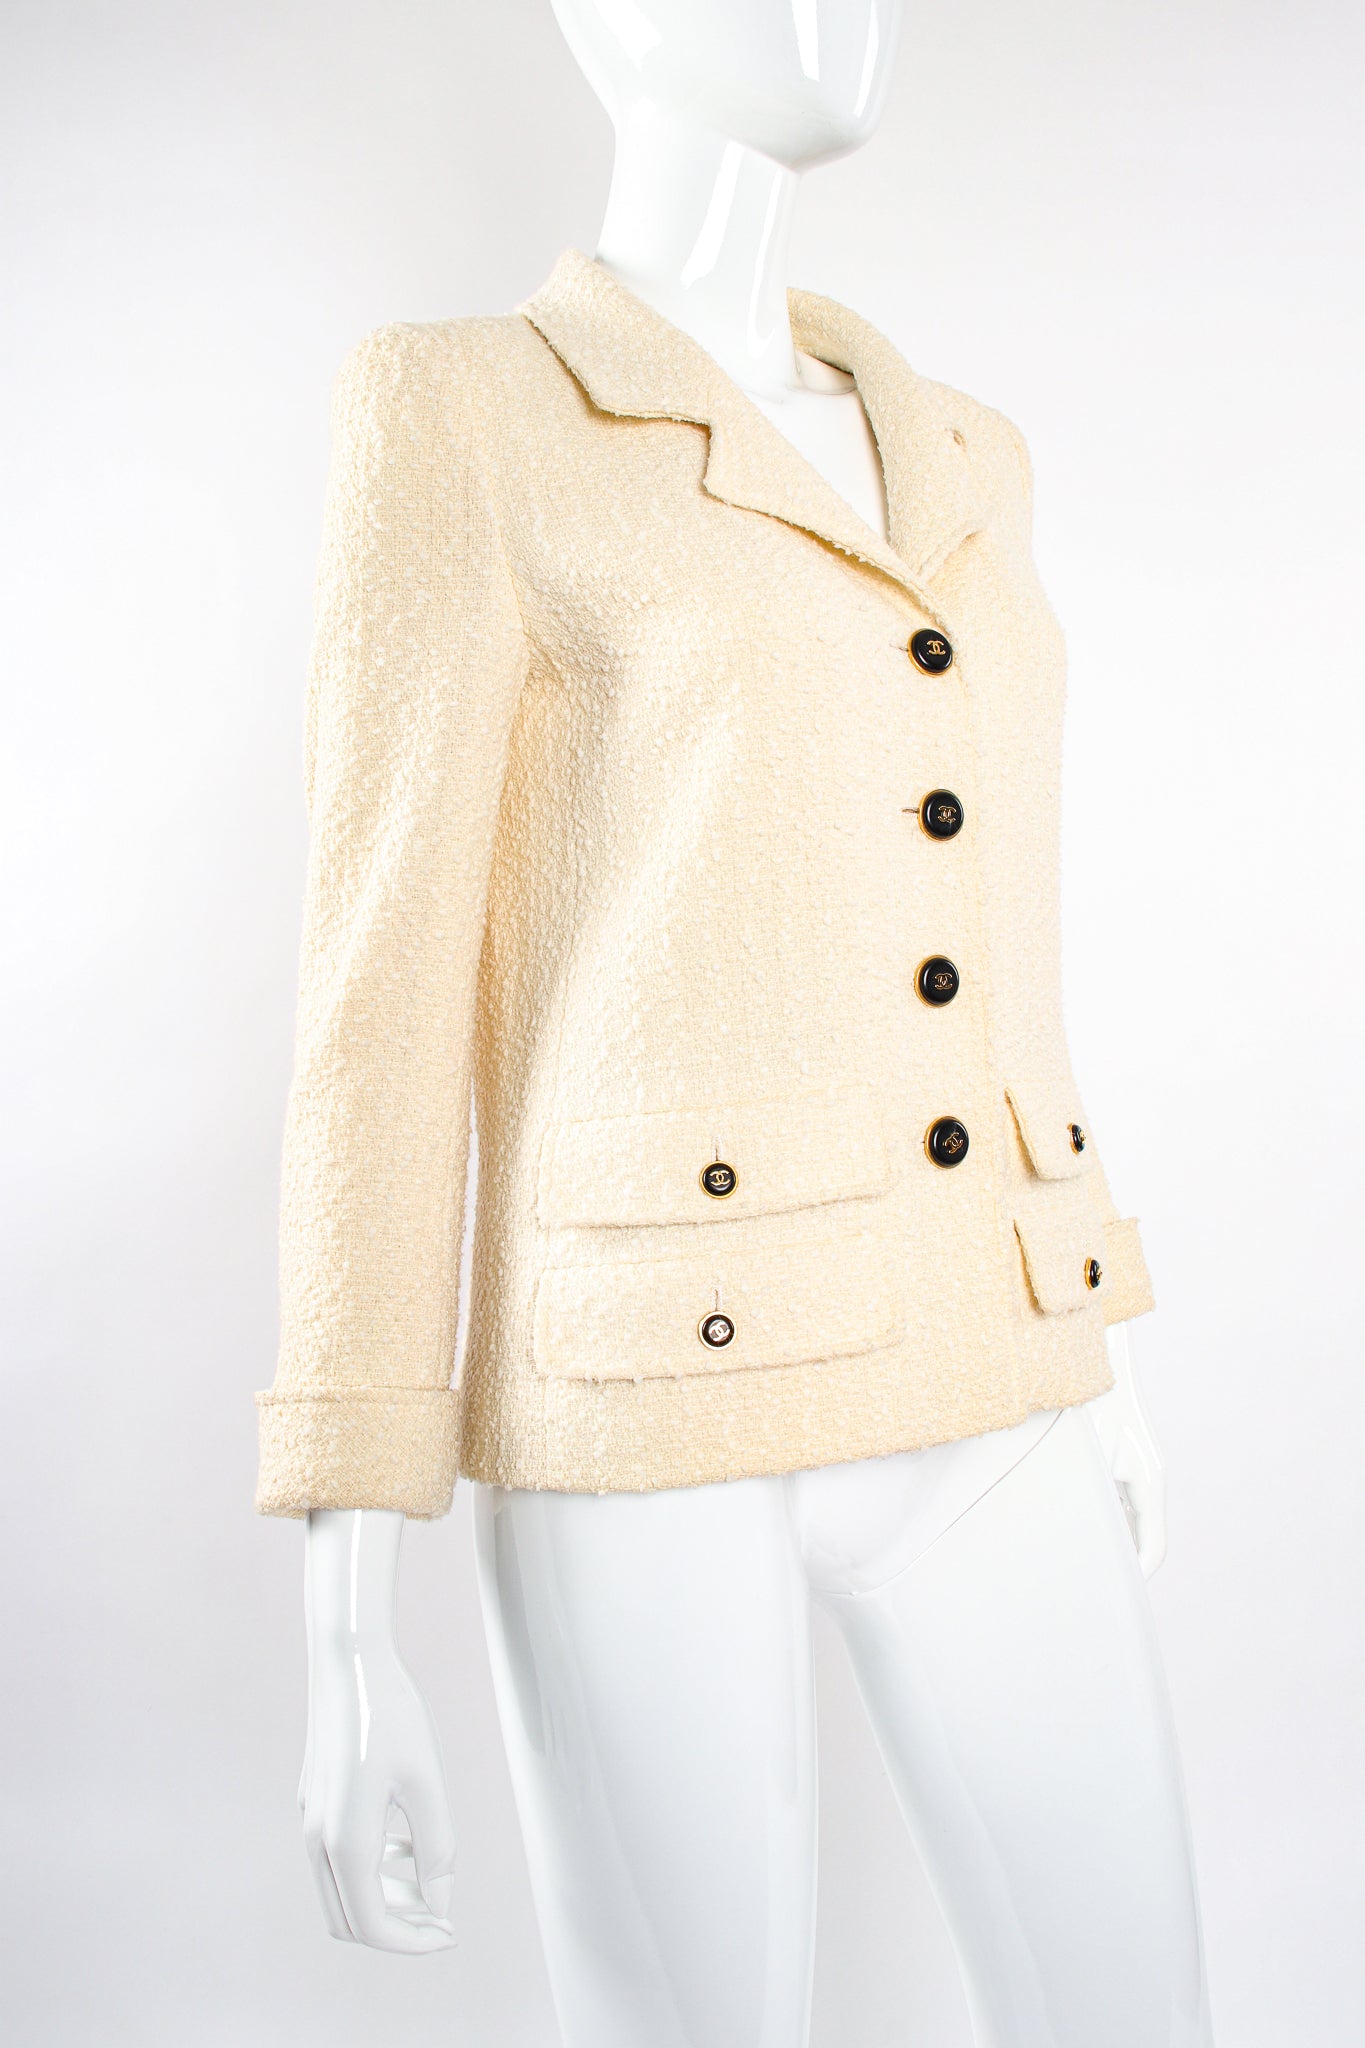 1995 Vintage Chanel Tweed Jacket with Playing Cards Motif at 1stDibs